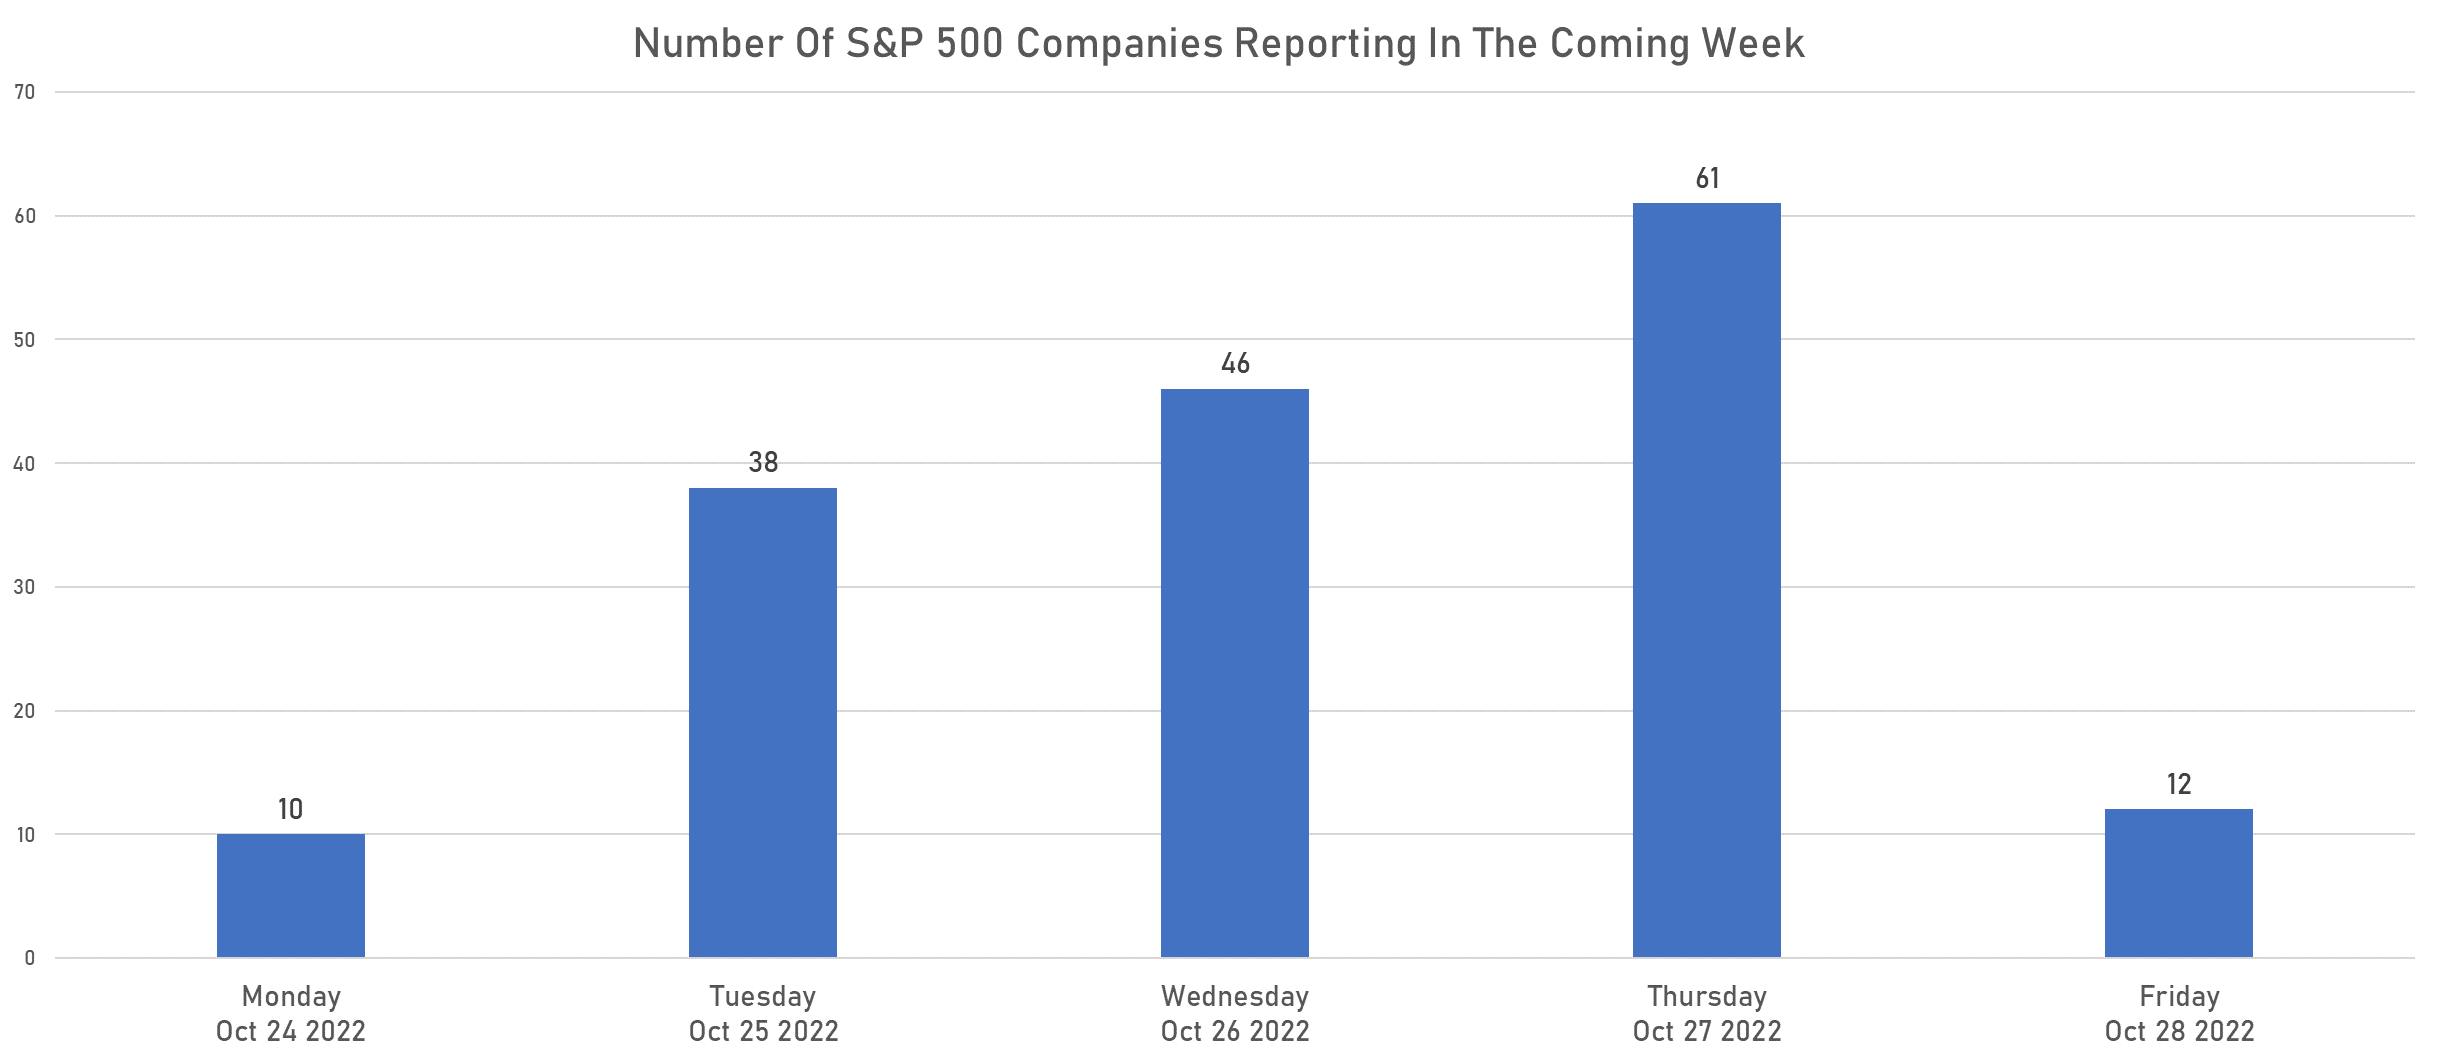 Number of companies reporting next week | Sources: phipost.com, Refinitiv data